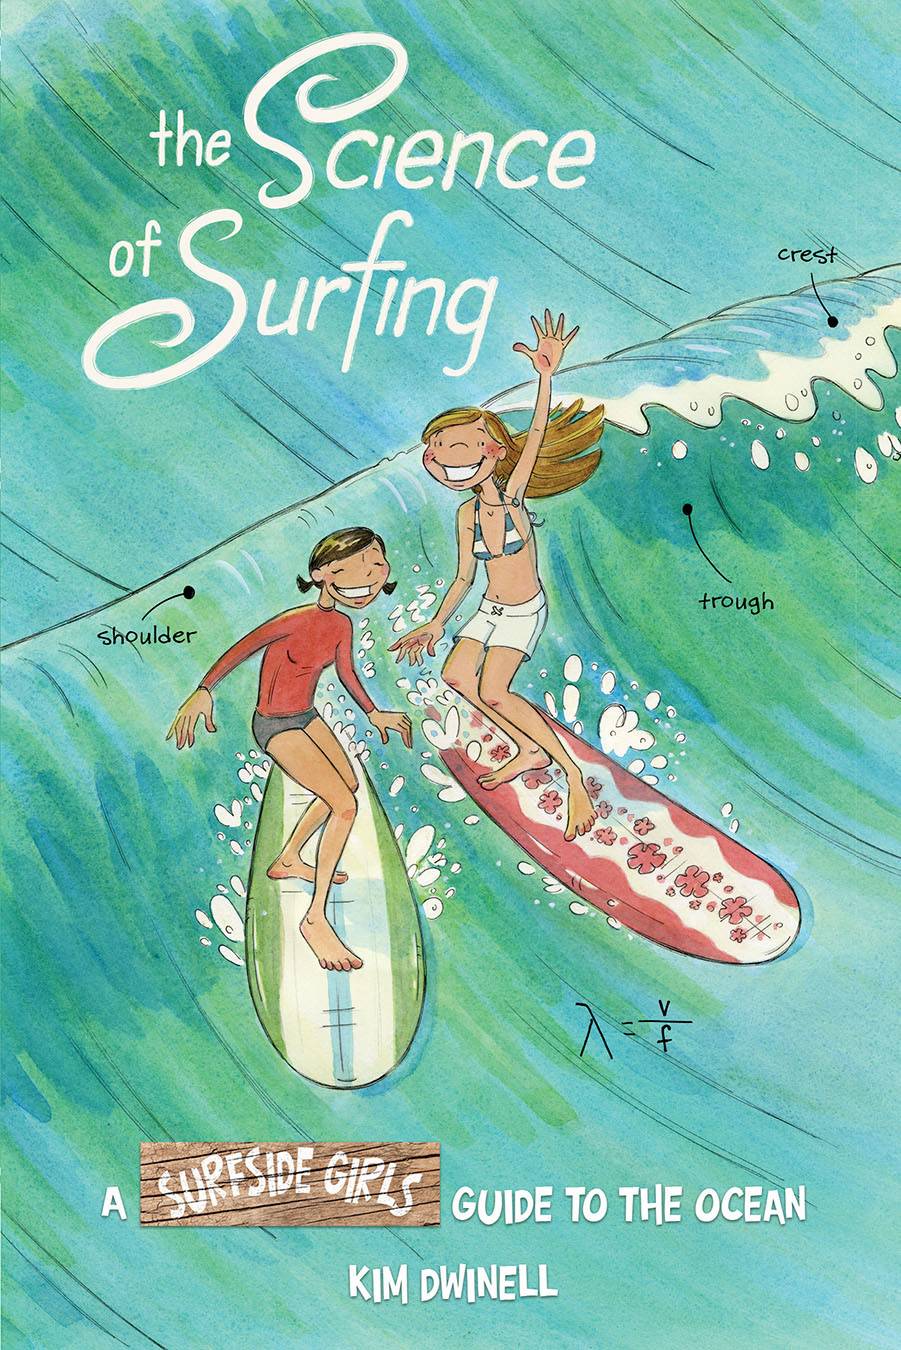 Science Of Surfing Surfside Girls Guide to the Ocean